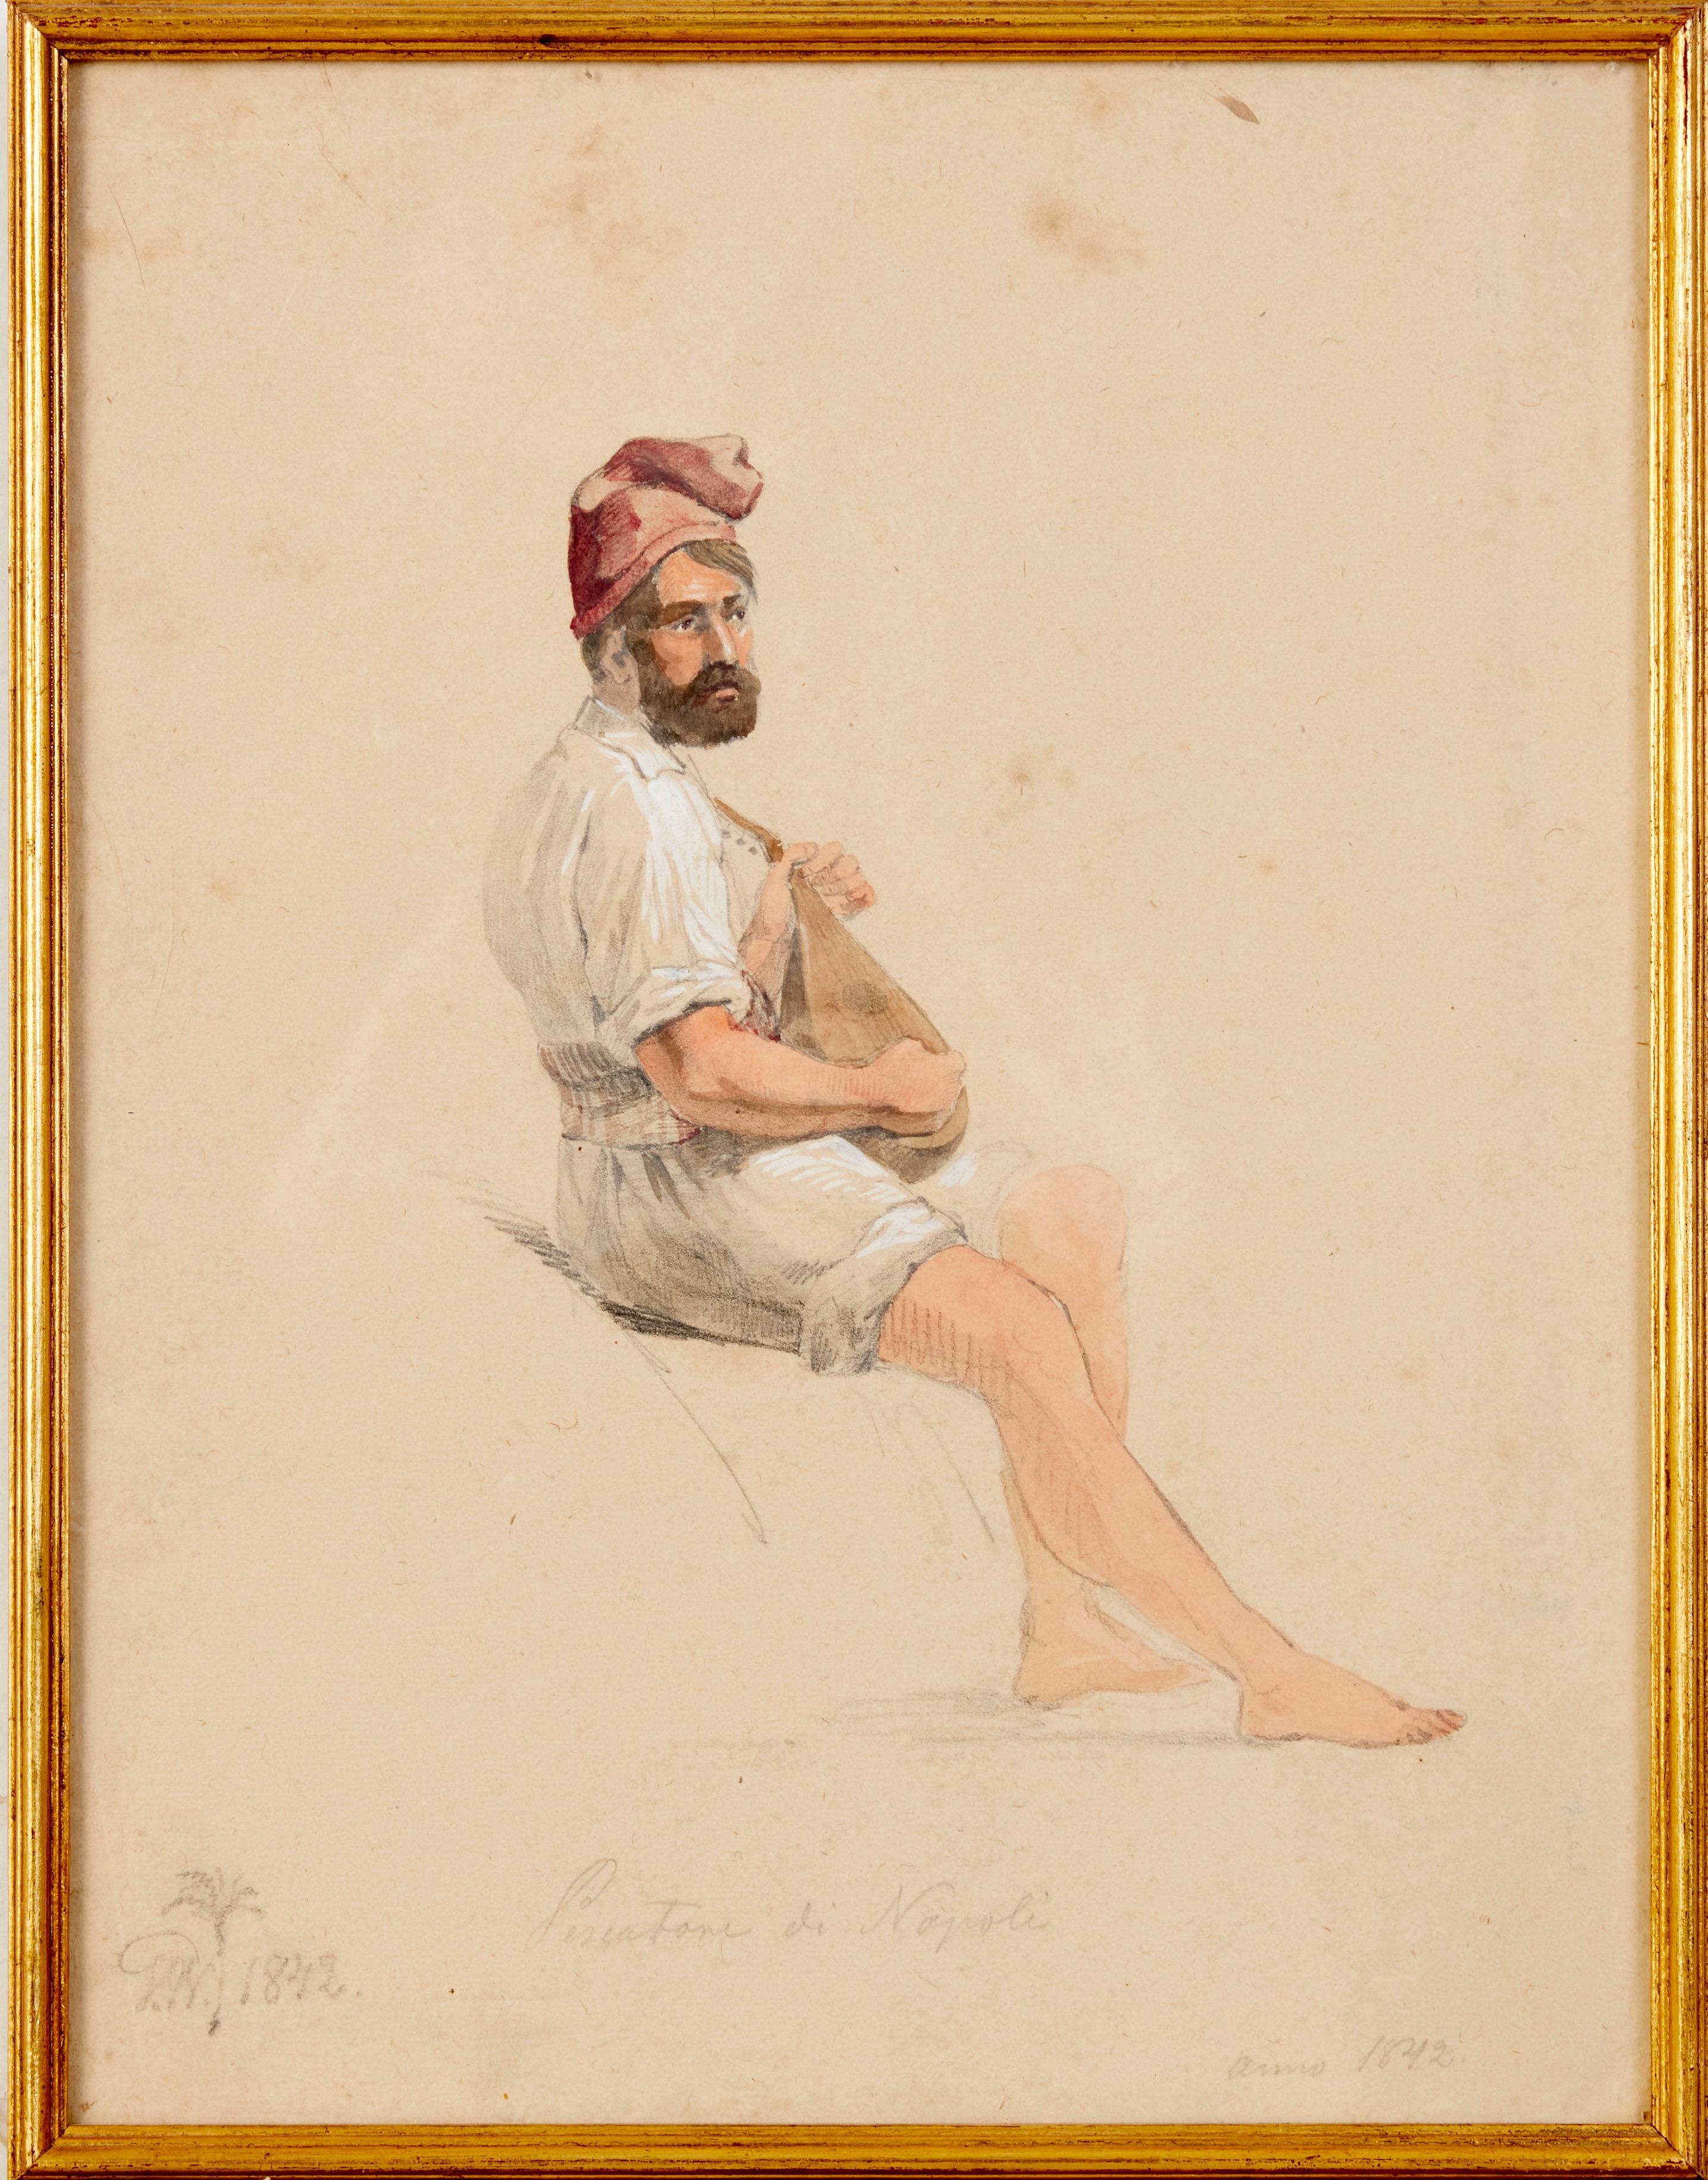 A fine watercolor of a Neapolitan fisherman playing on his lute by Gustav Wilhelm Palm (1810-1890). Signed and dated 1842. On the bottom center written 